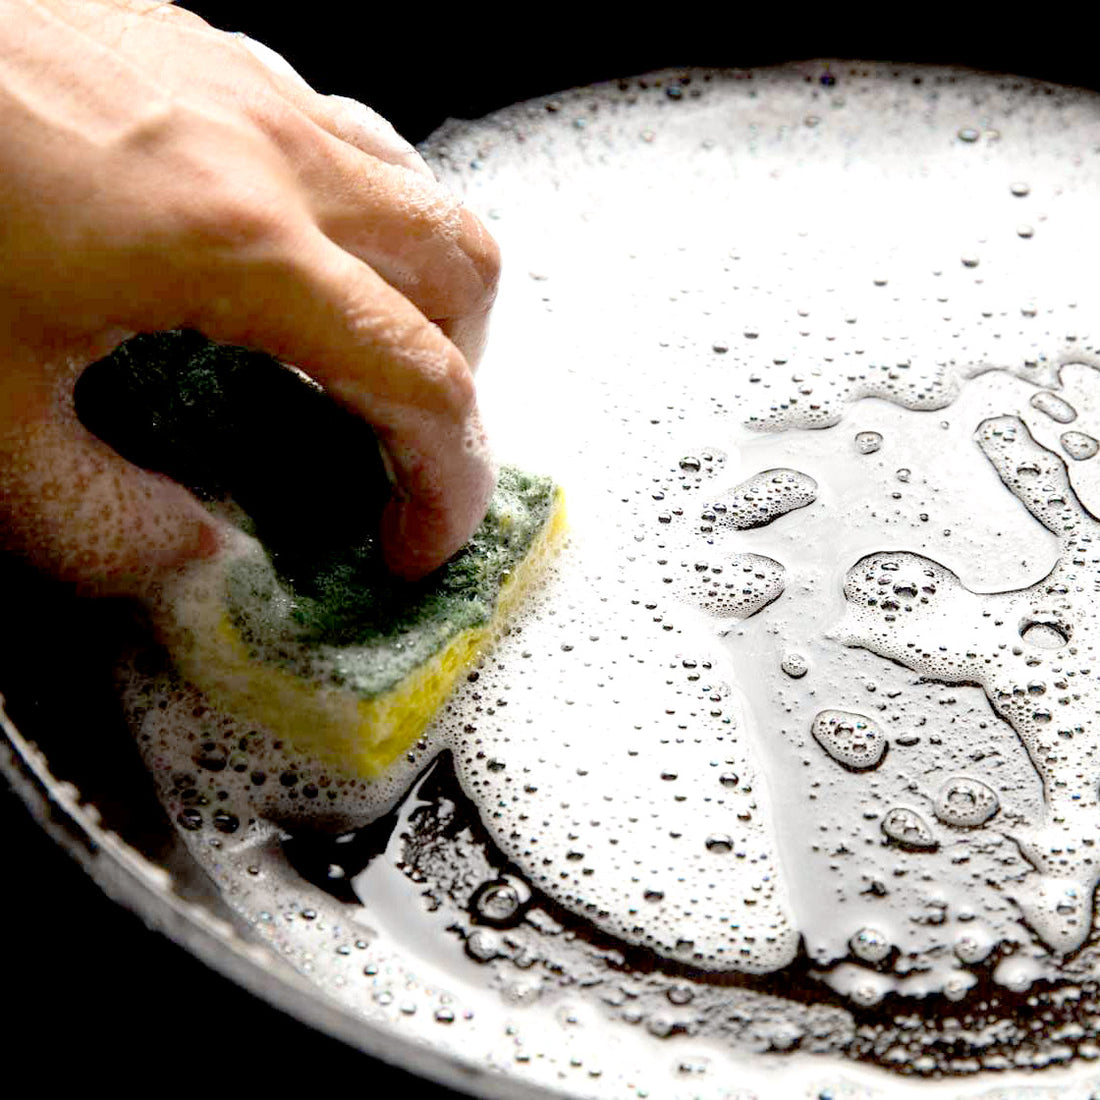 How to clean your cookware and make it last